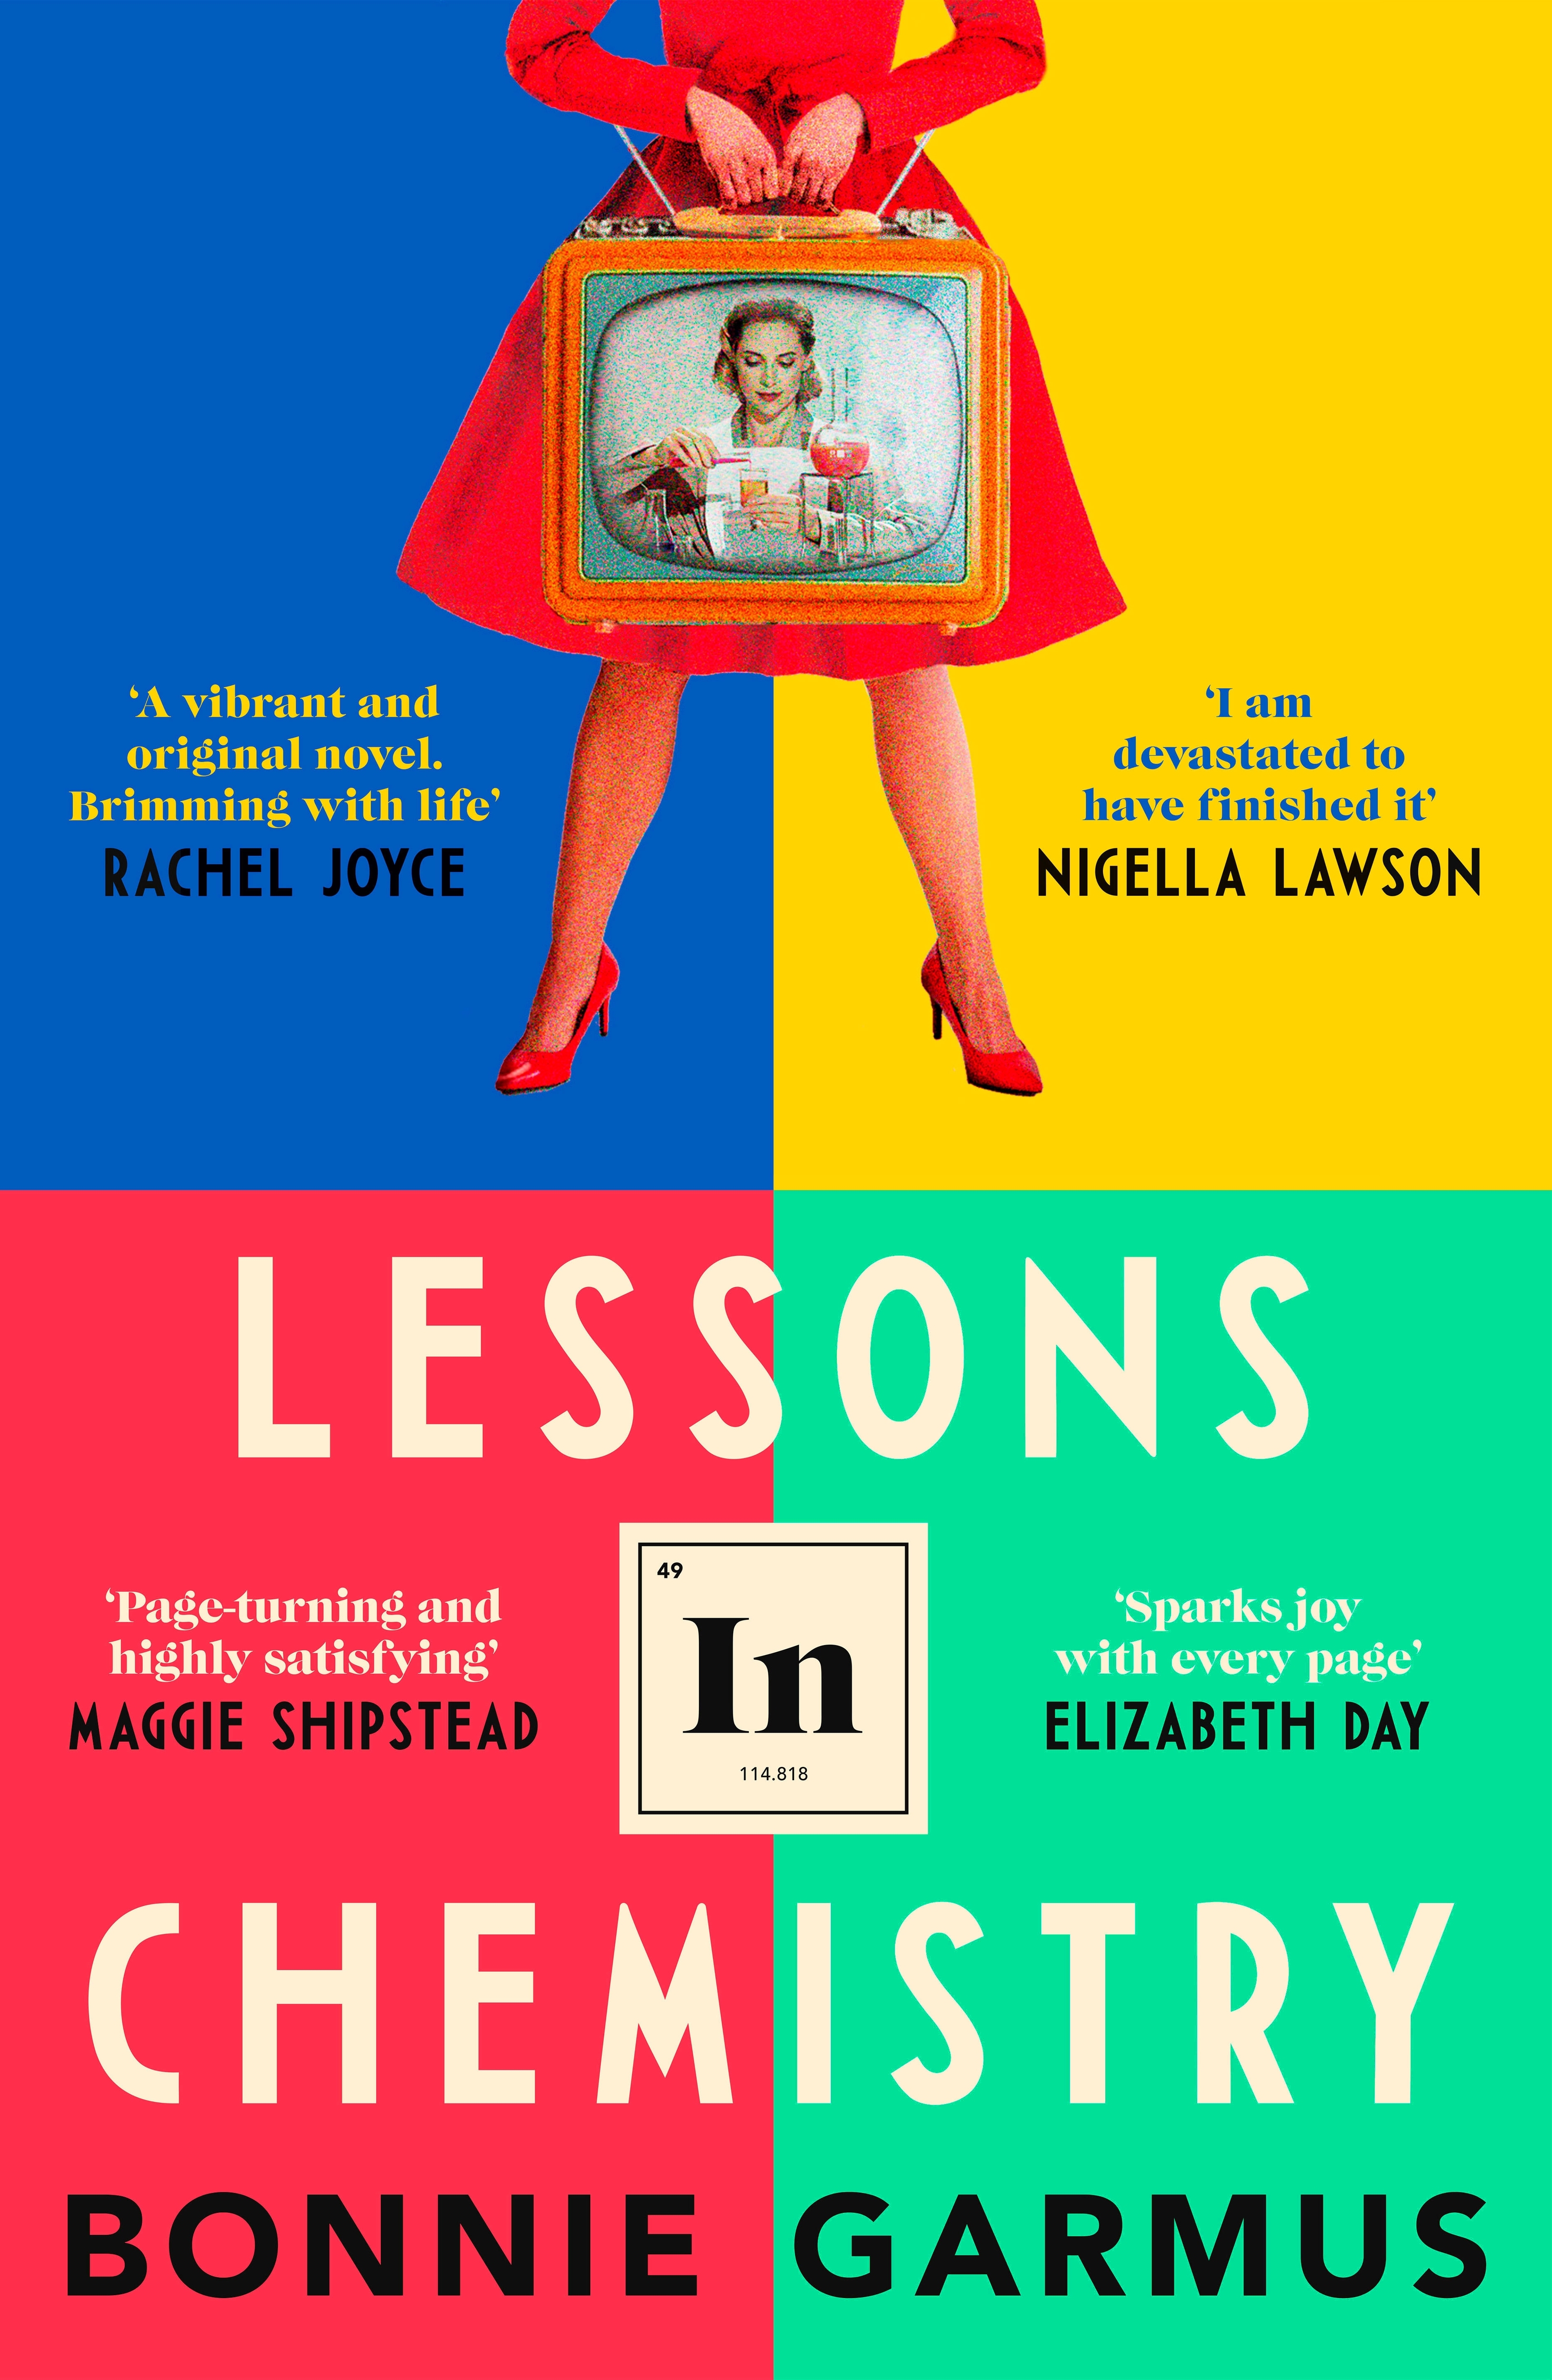 the chemistry lesson